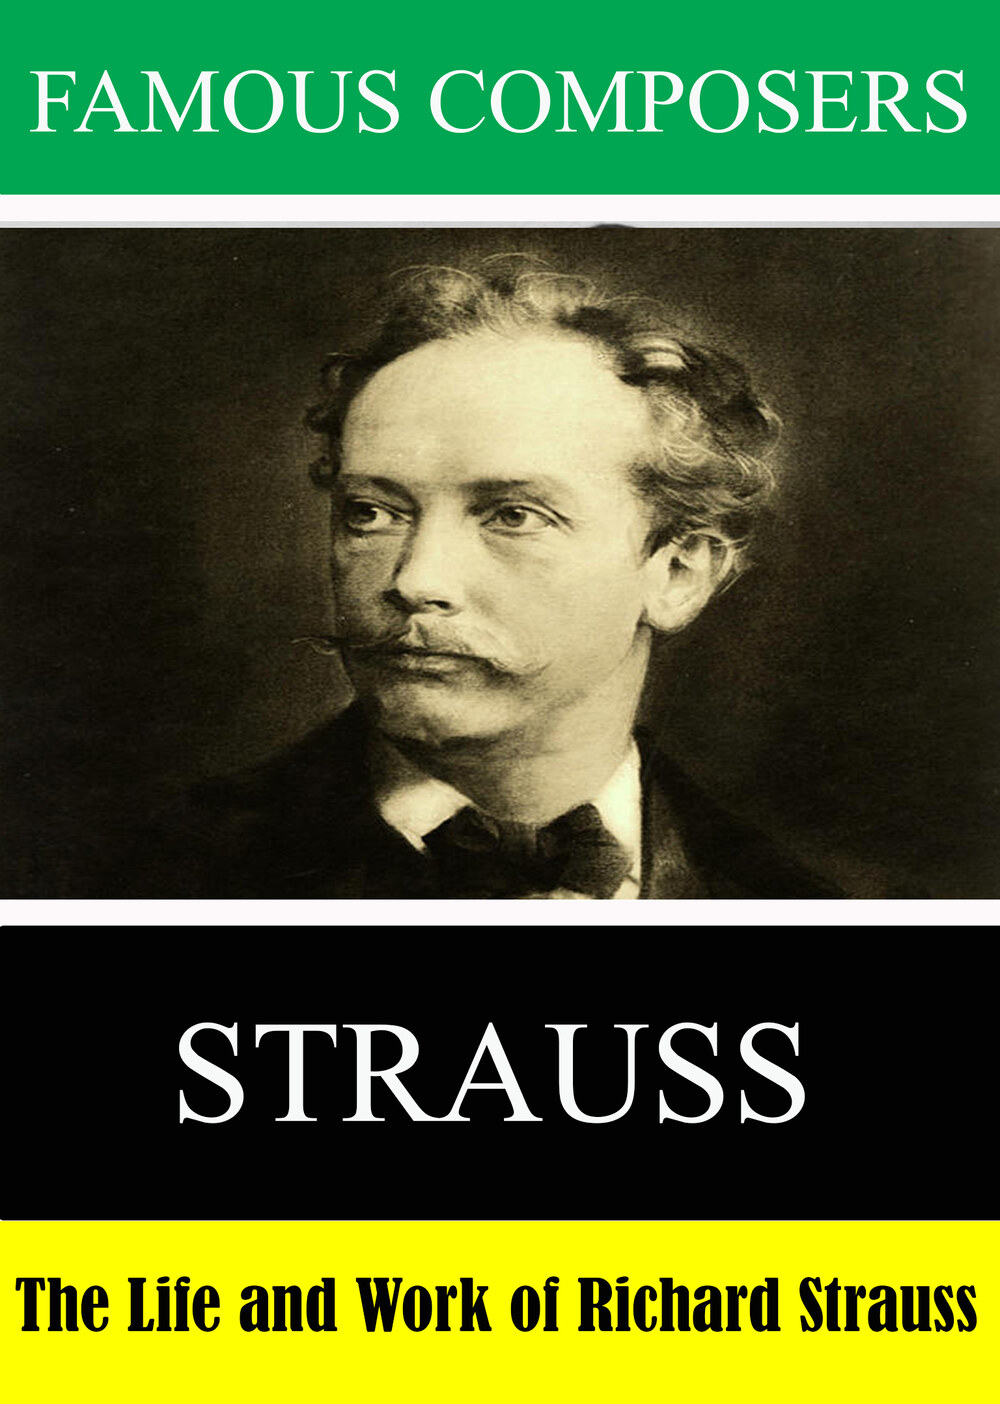 L7927 - Famous Composers: The Life and Work of Richard Strauss